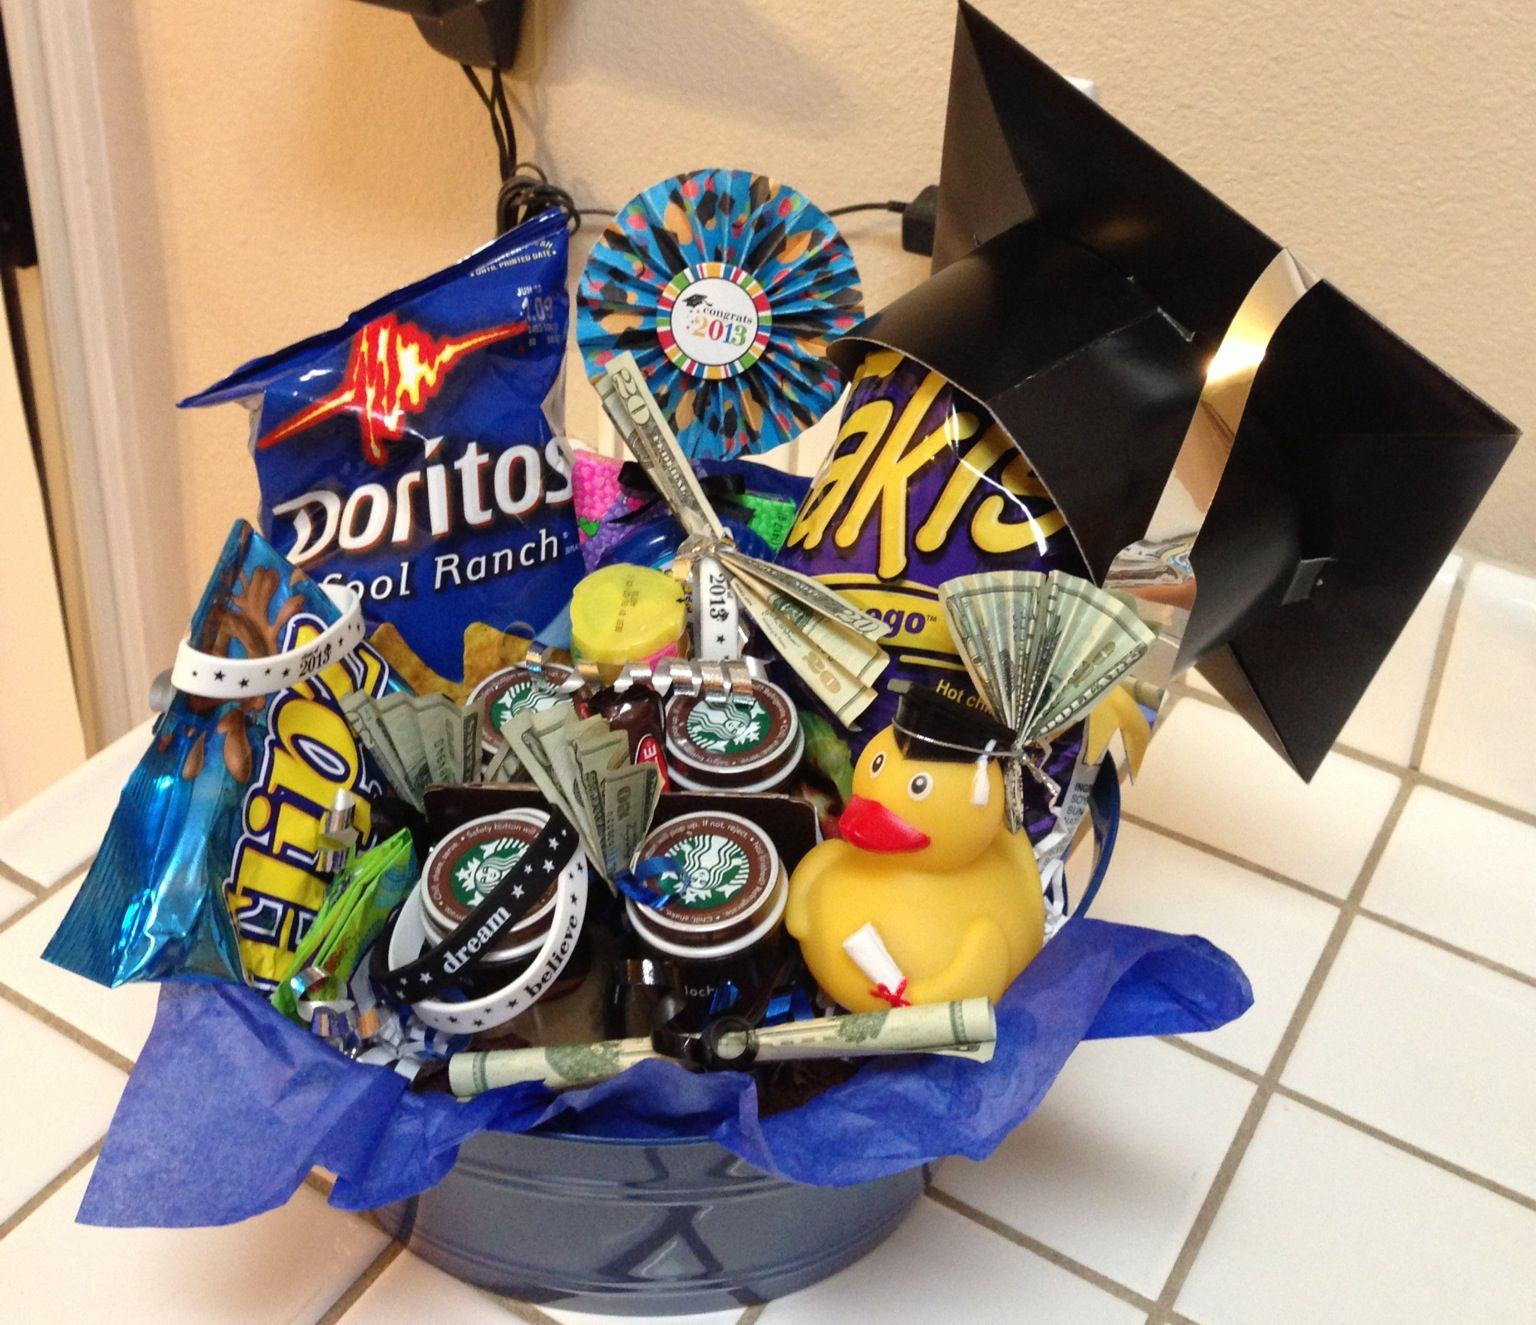 Boy High School Graduation Gift Ideas
 Graduation t basket for 8th grader With images